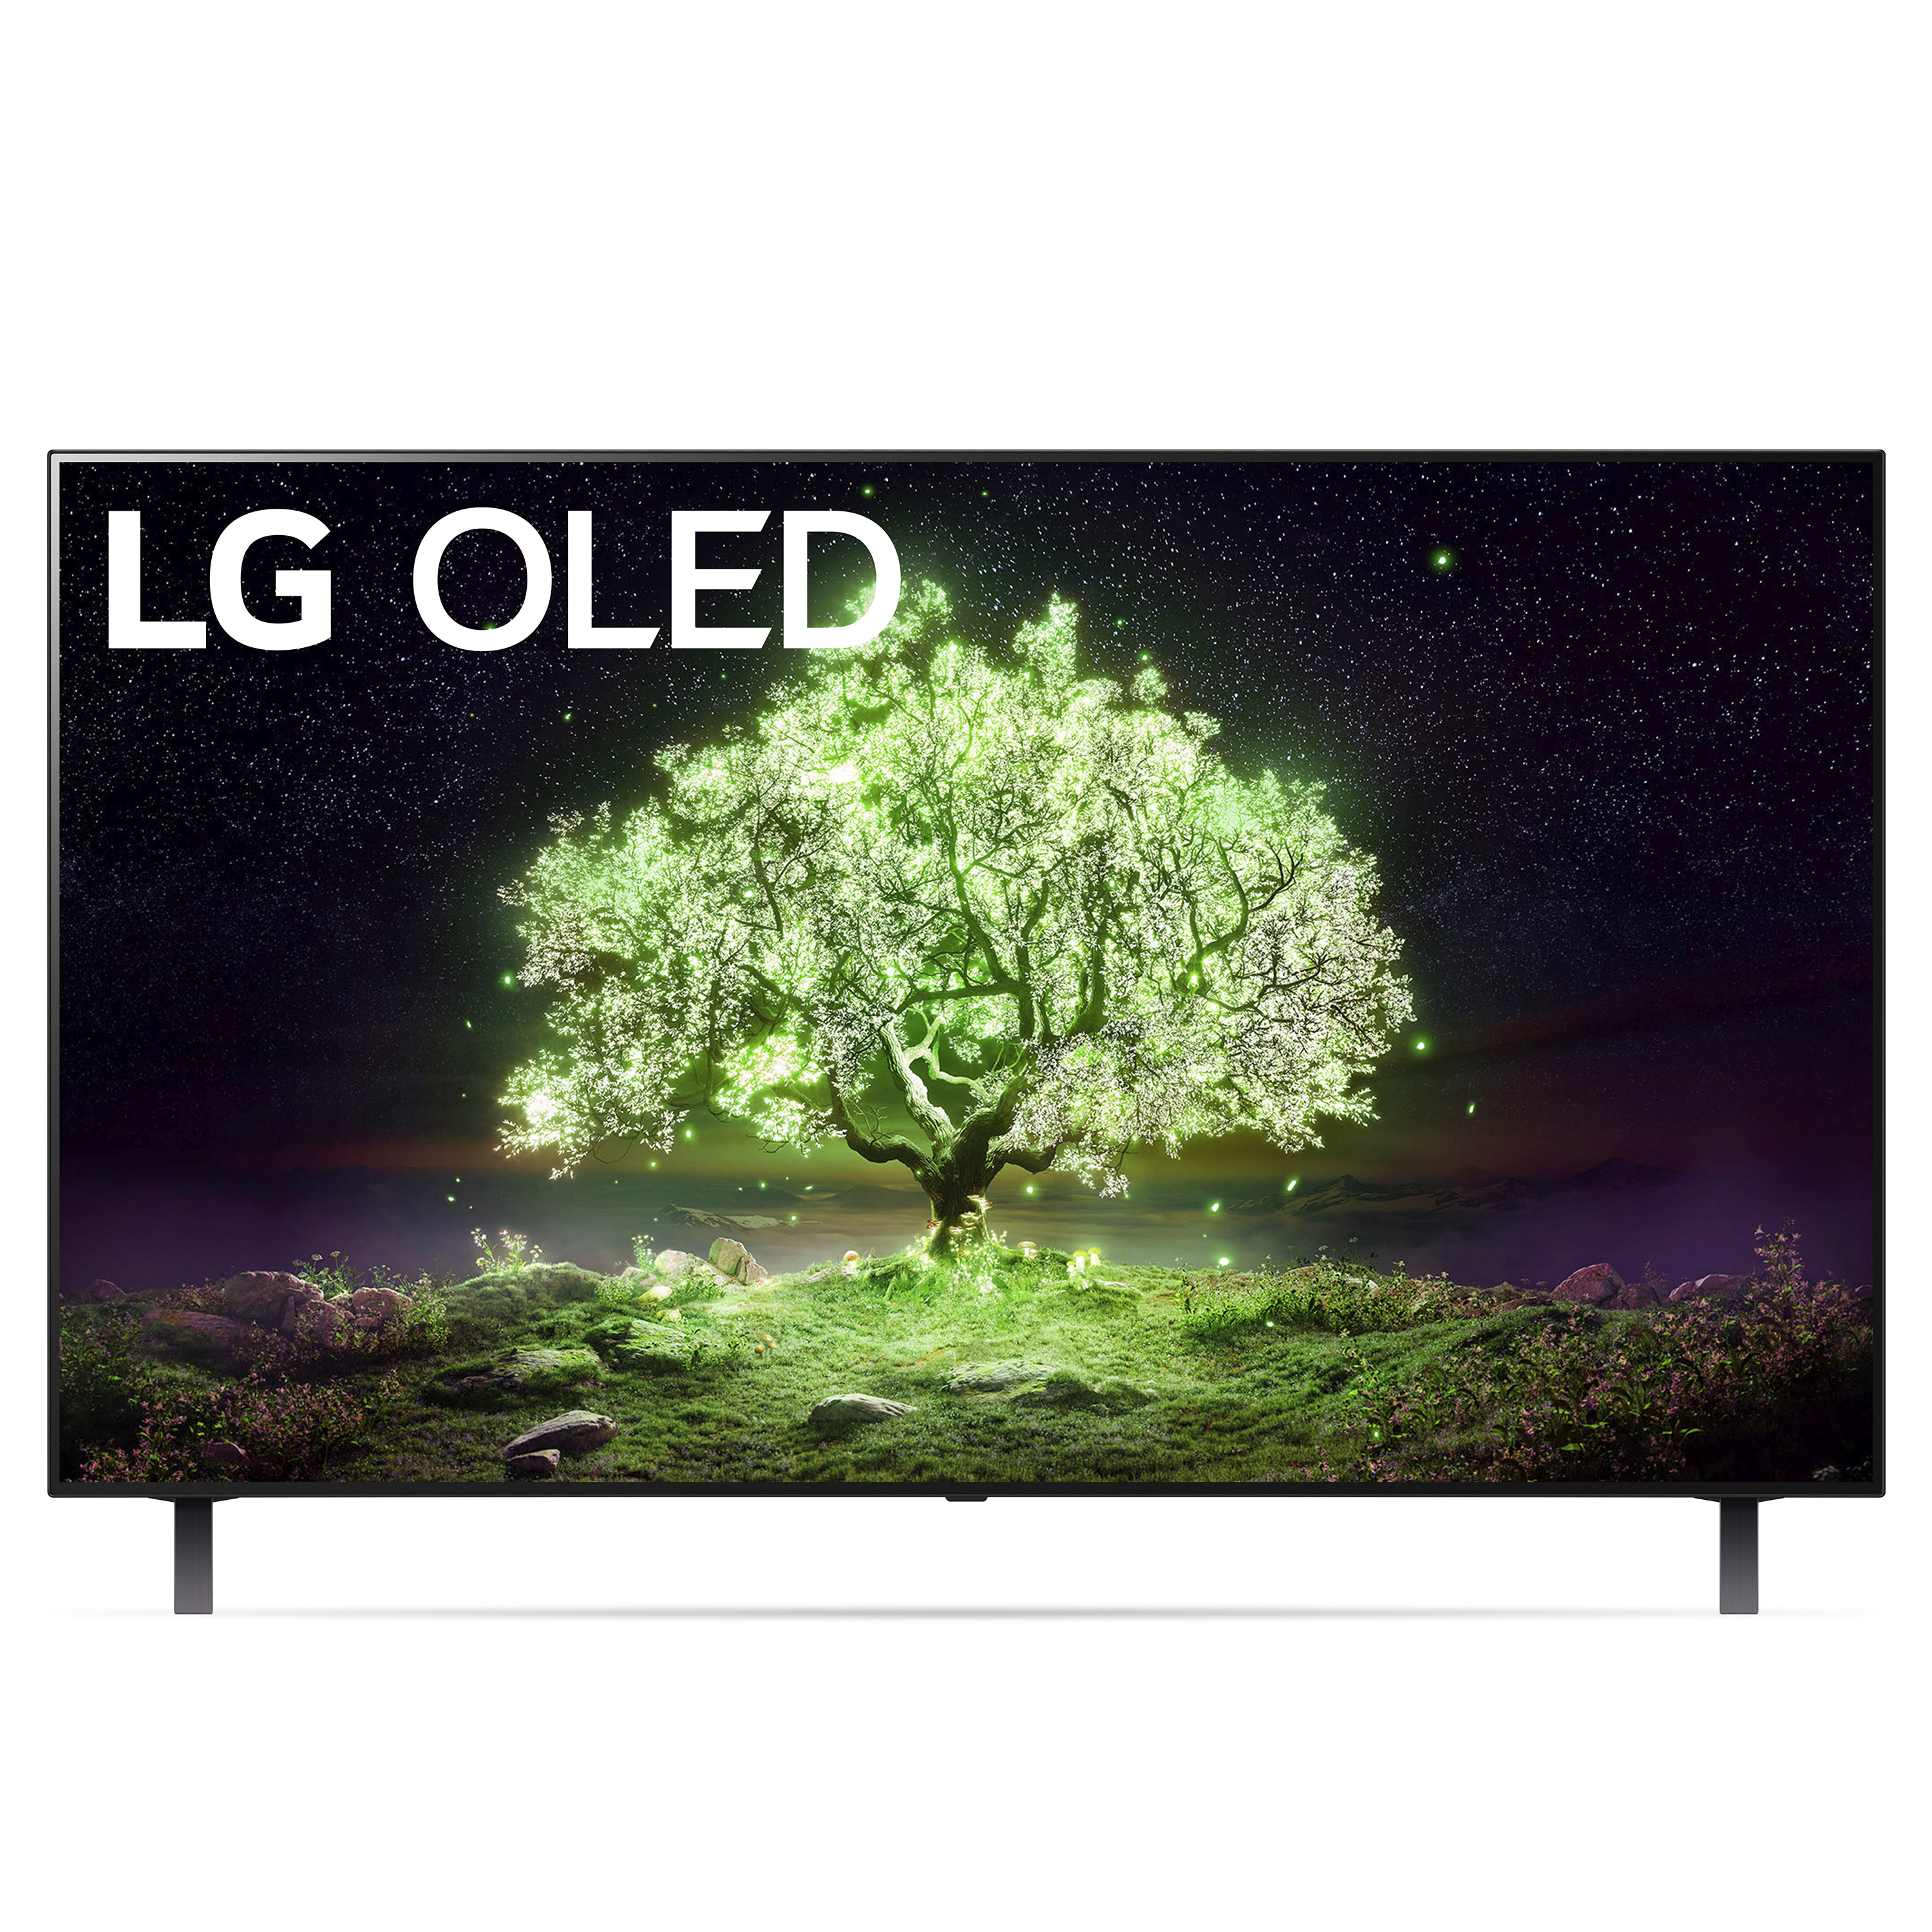 LG 48" Class 4K UHD 2160P OLED Smart TV with HDR, OLED48A1PUA - image 1 of 25